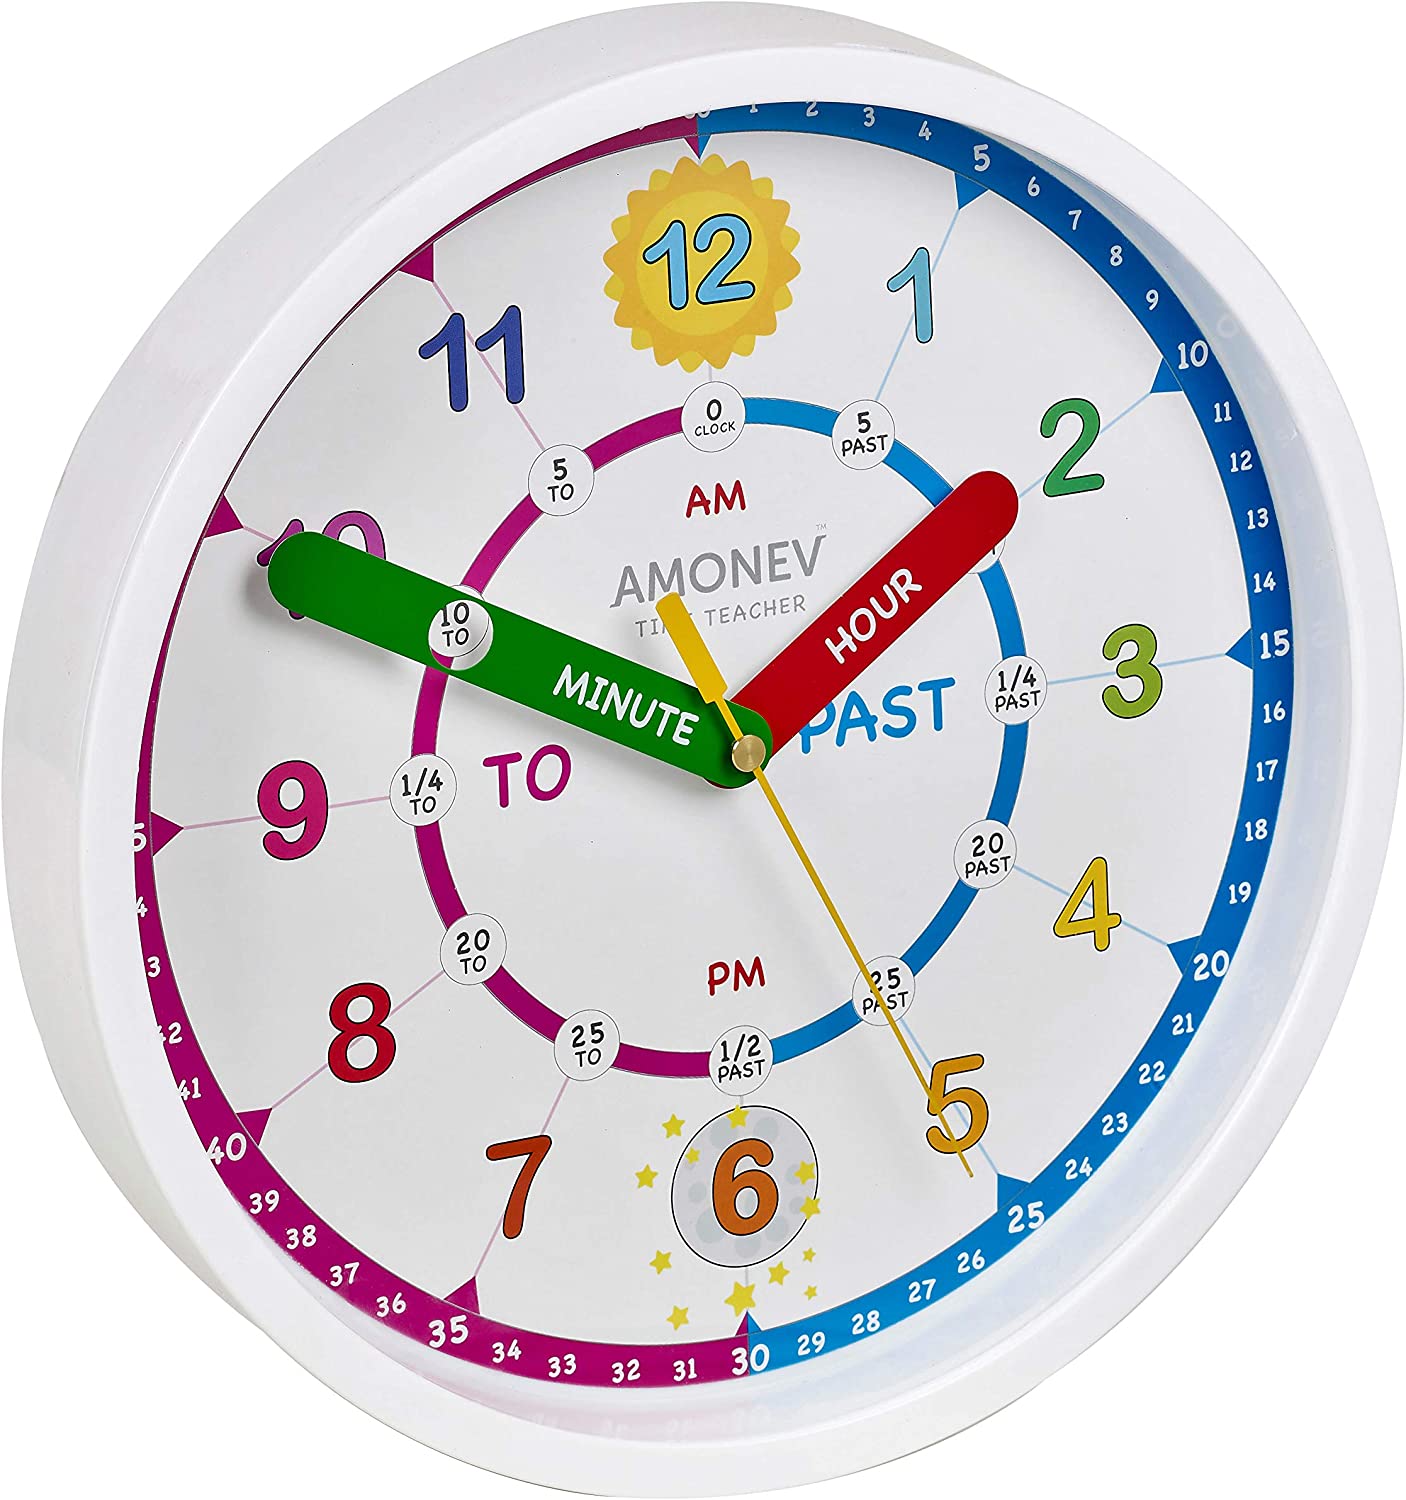 A side view of the Time Teacher Scope Clock.